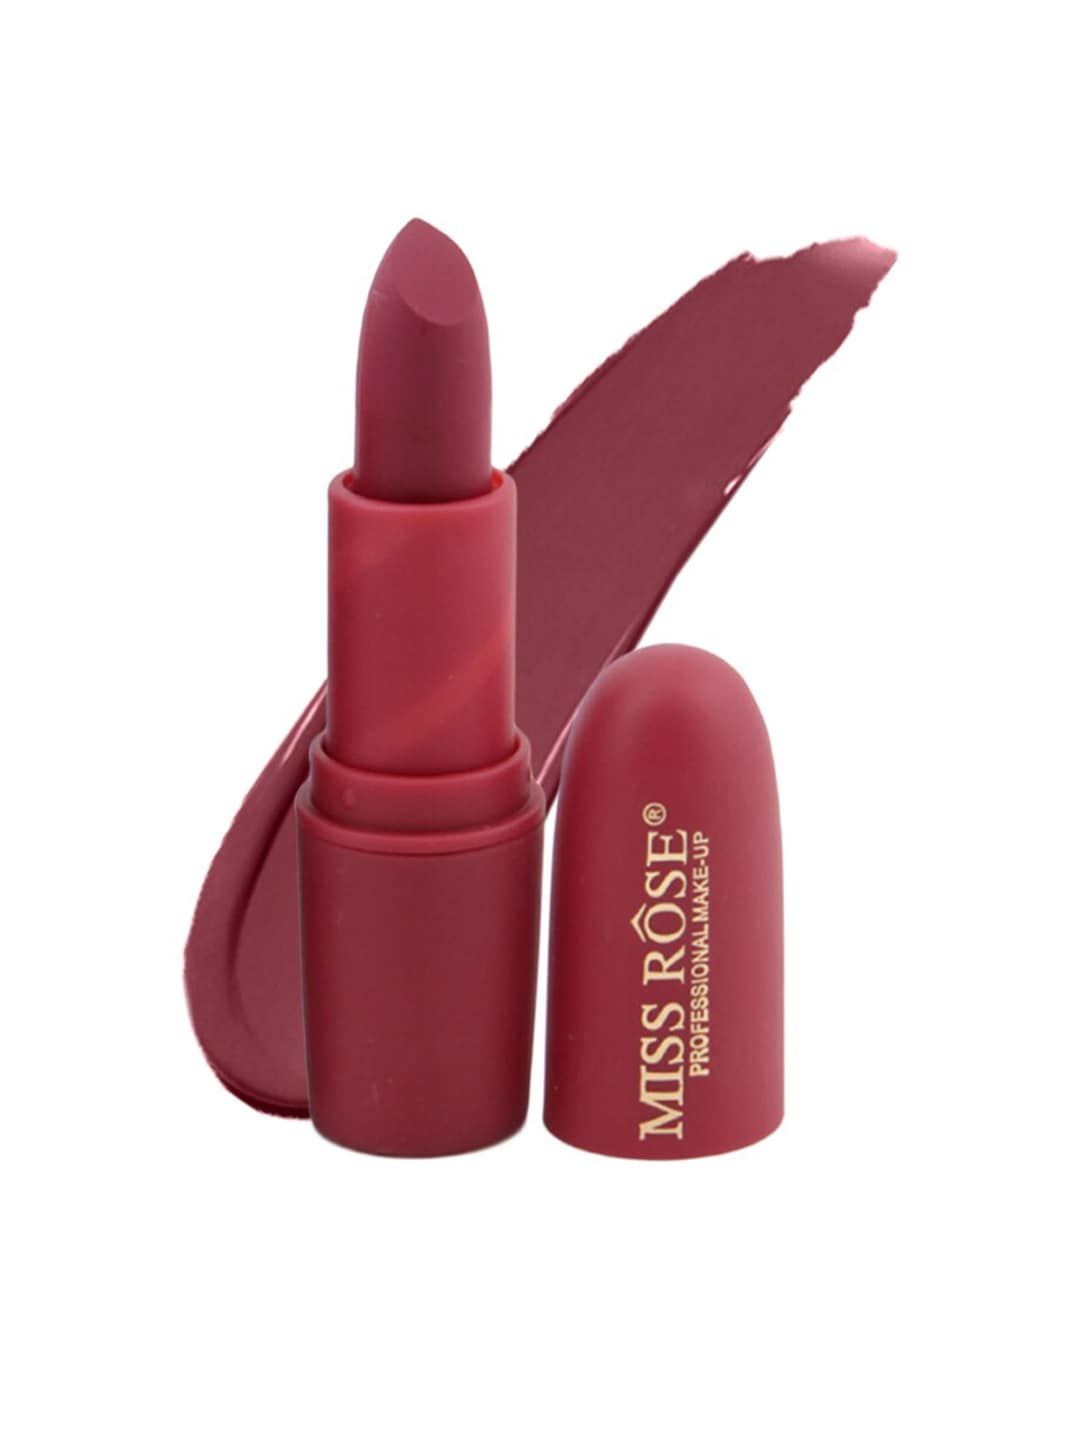 MISS ROSE Maroon 49 Chii Creamy Matte Bullet Lipstick 20g Price in India